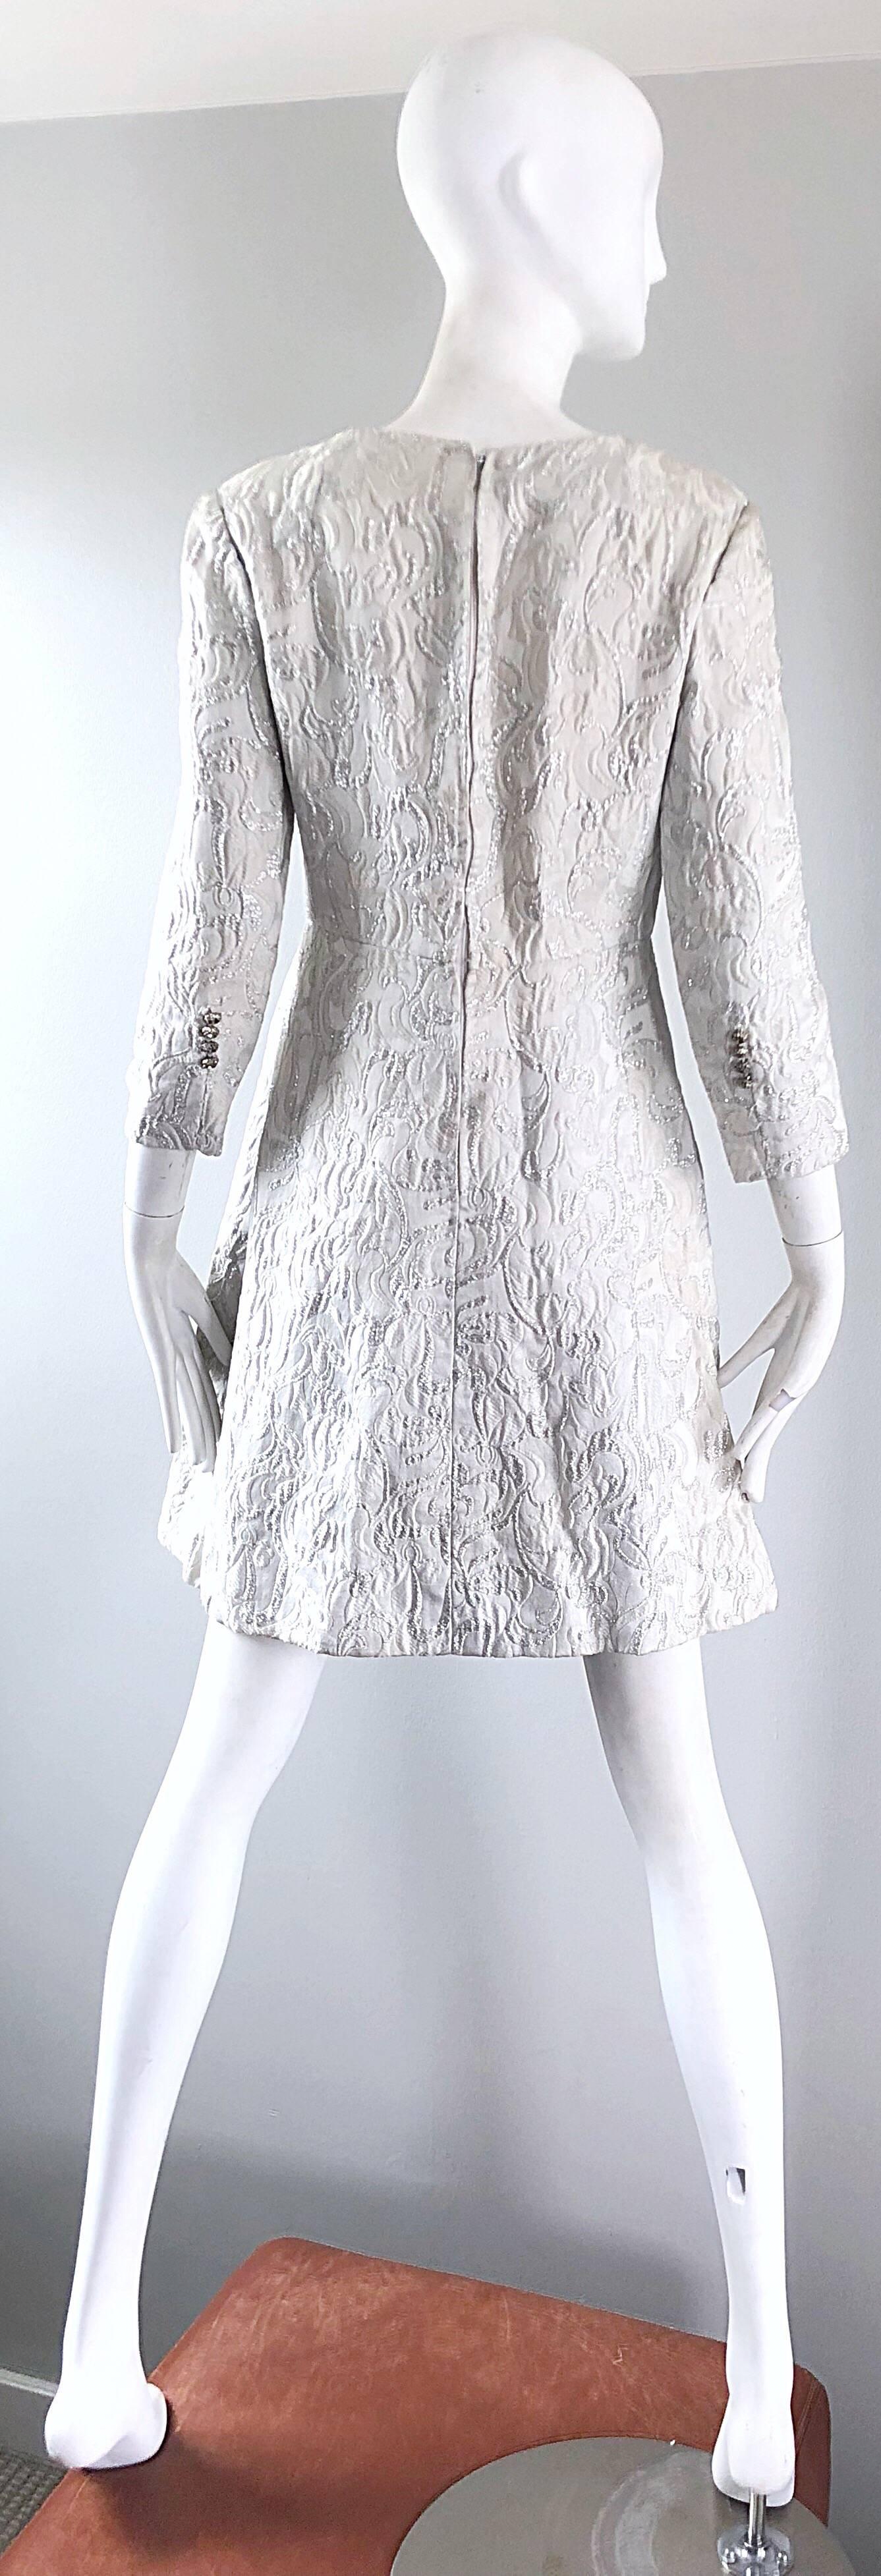 Women's Documented Ceil Chapman 1960s silk brocade silver and white A-Line dress